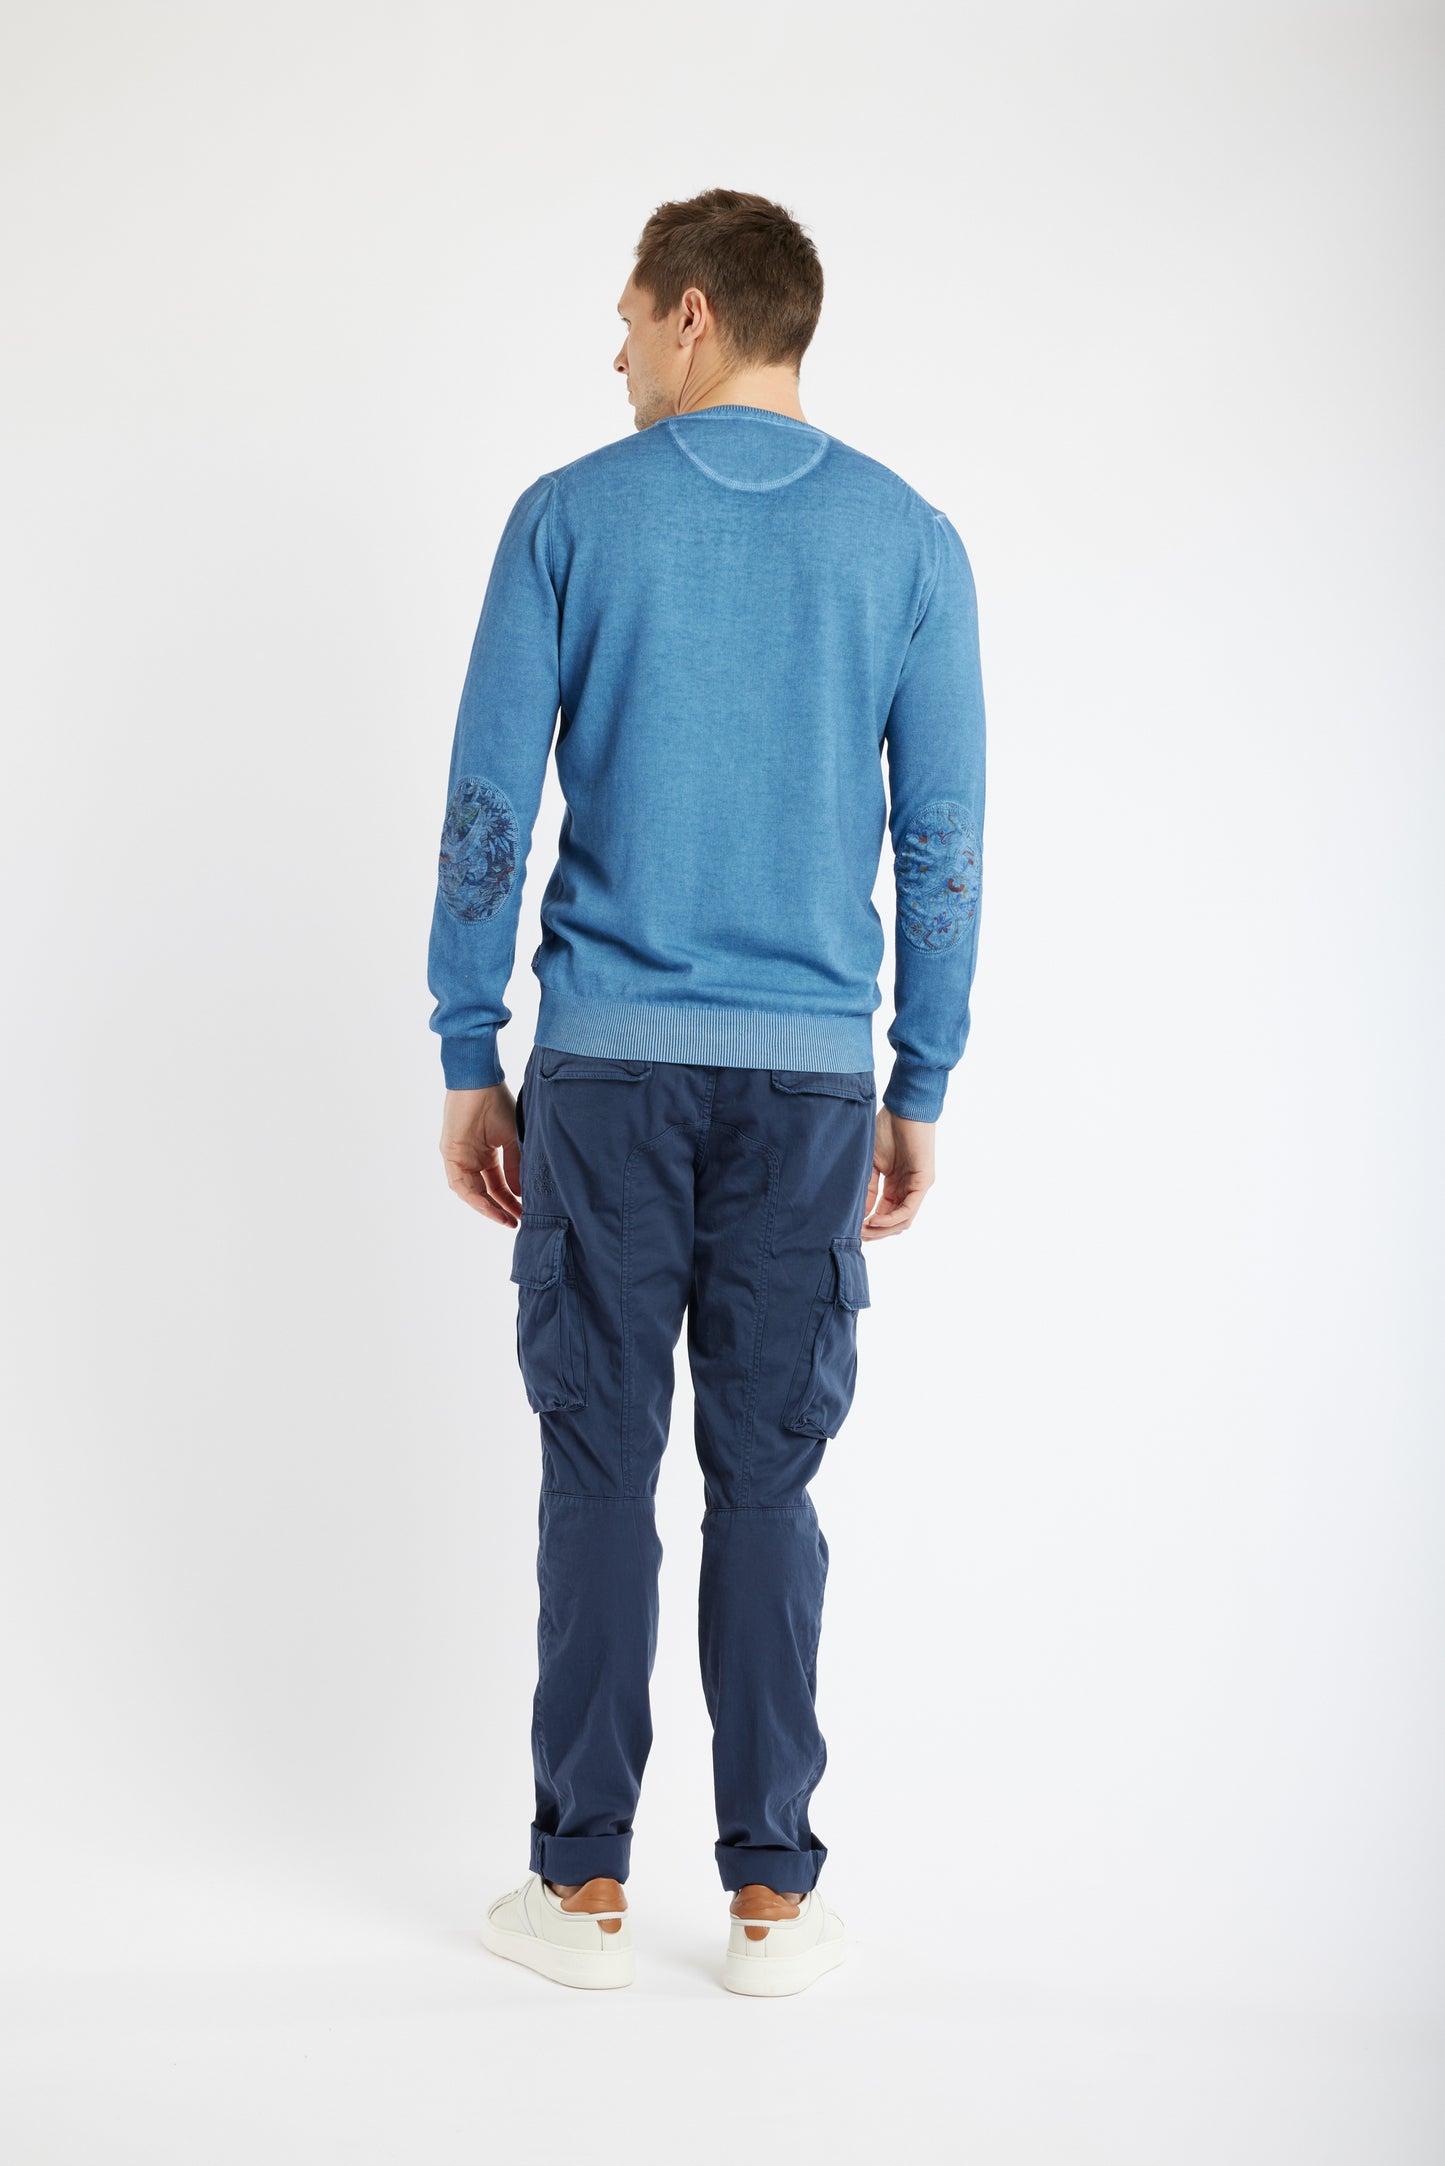 ELBOW SWEATER JEANS